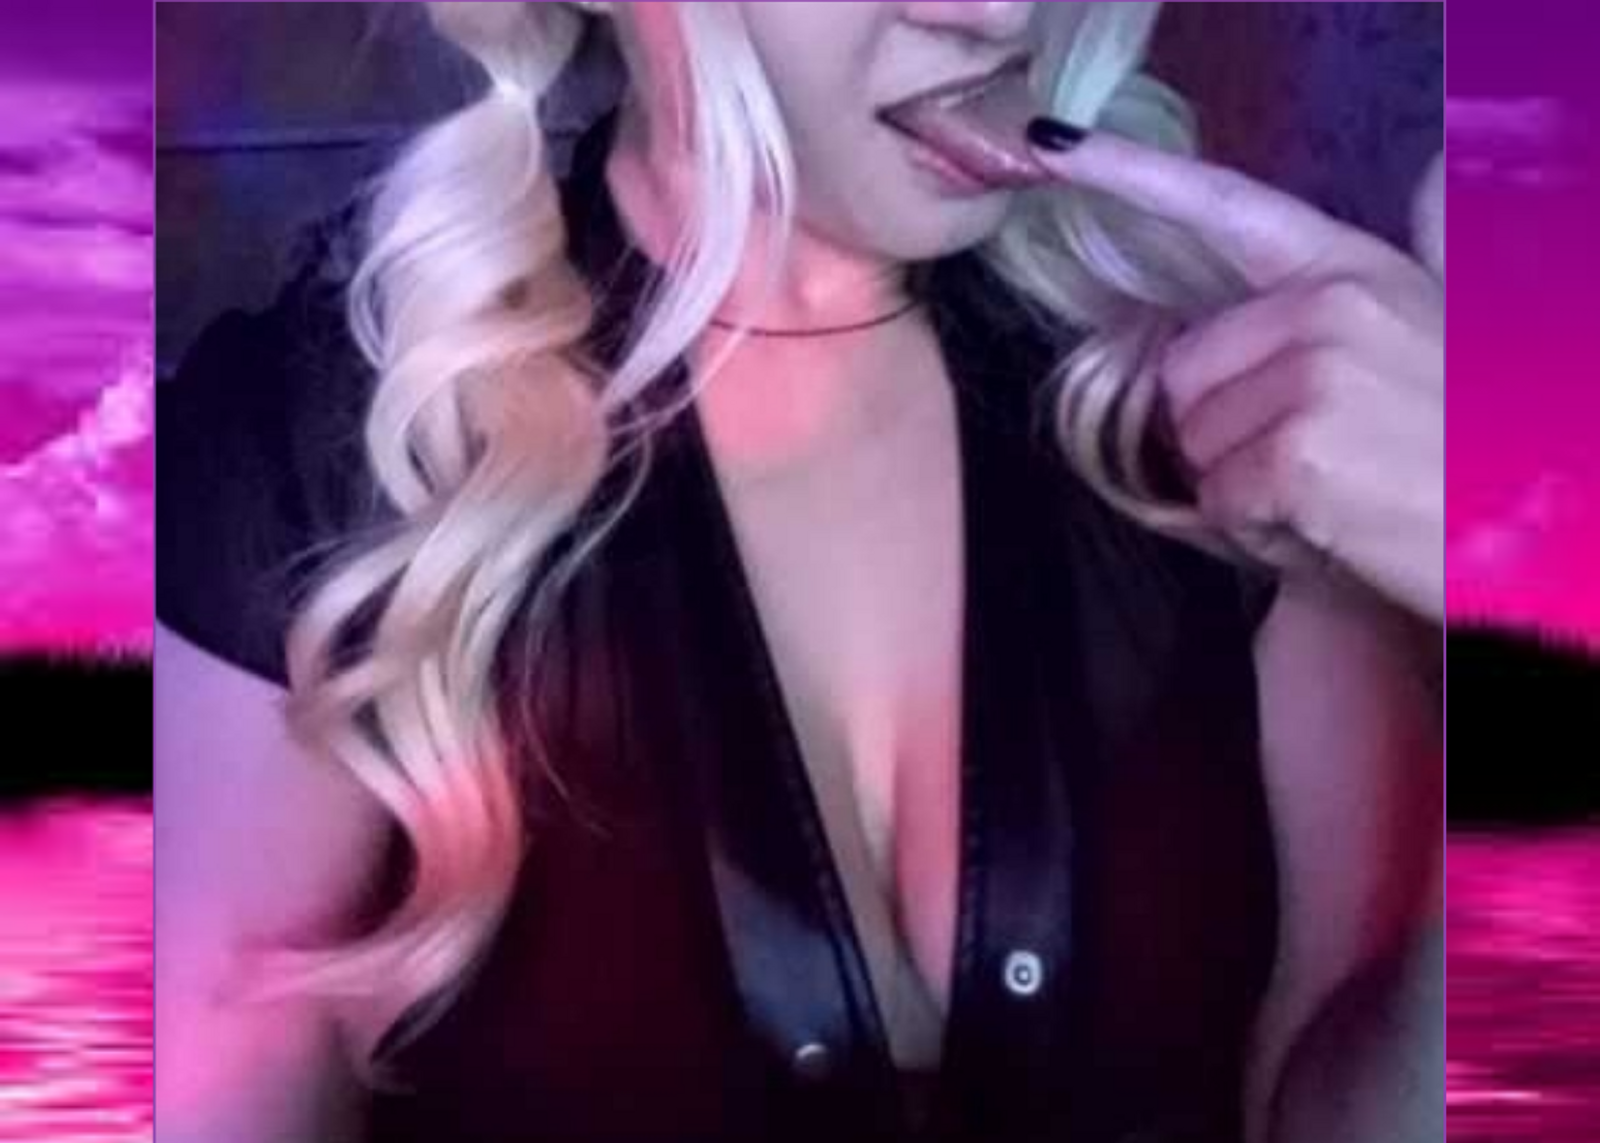 Hot Alice images from live cam show